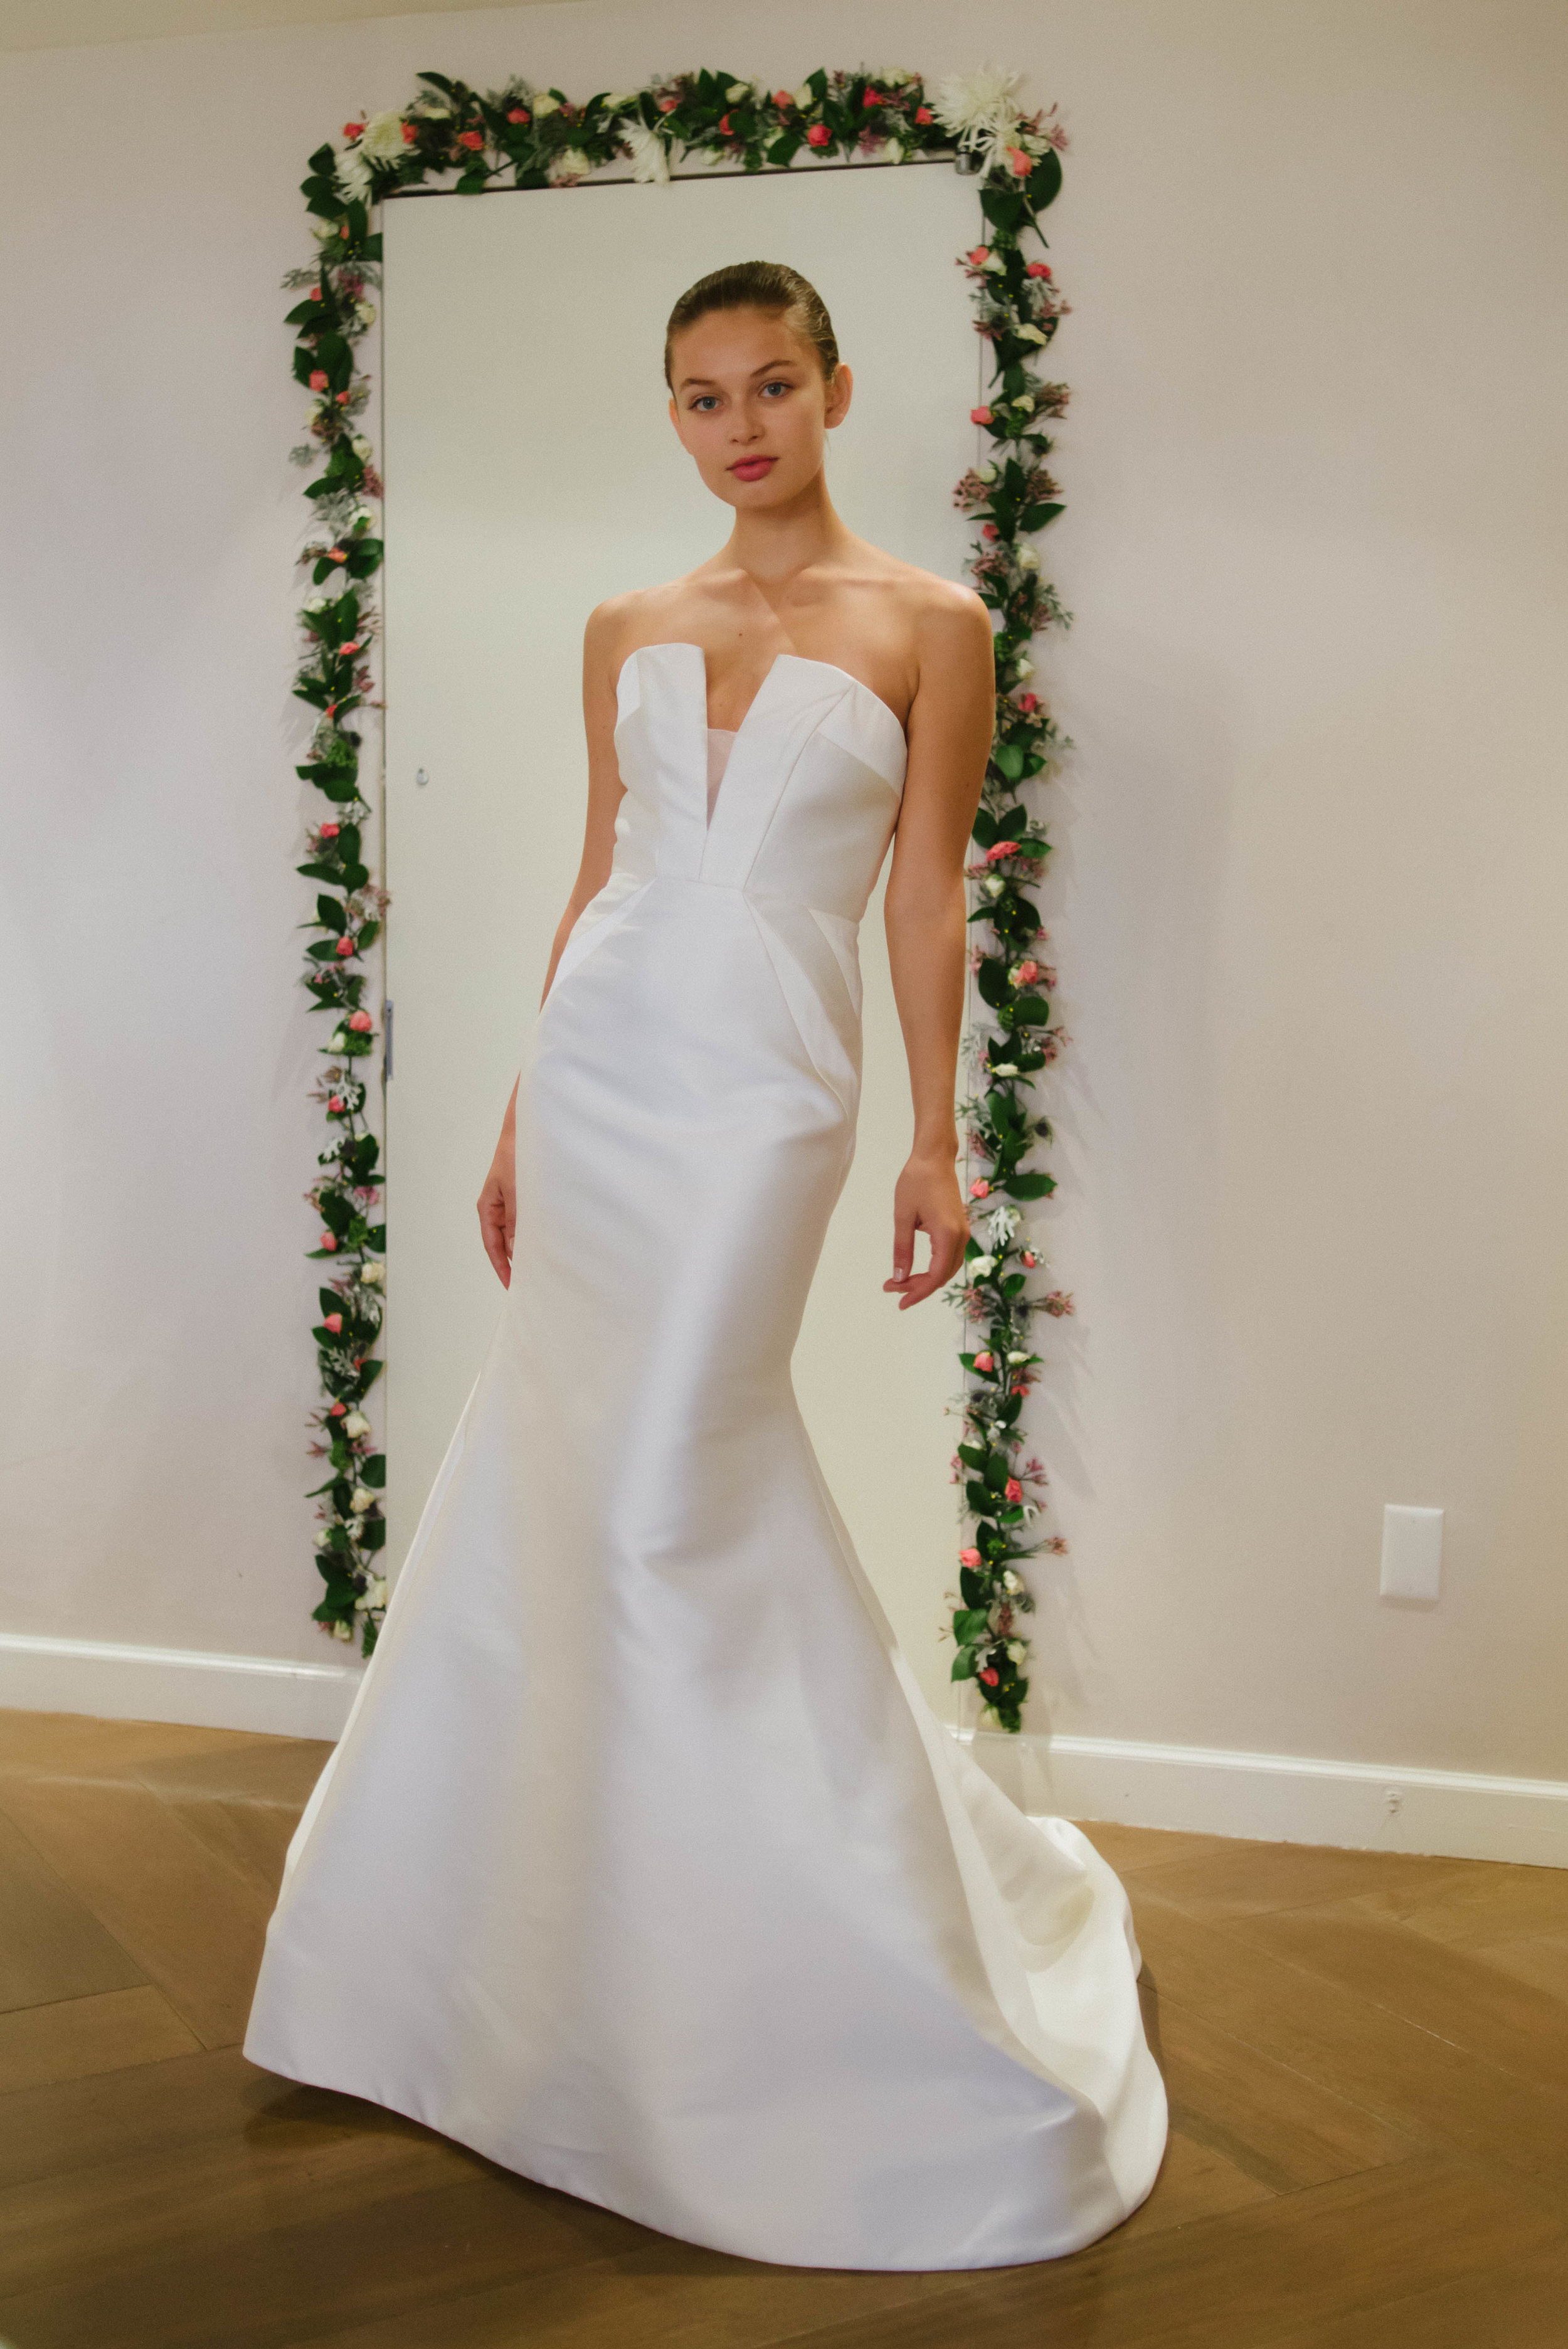  New York Bridal Fashion Week 2016 | Anne Barge Couture Collection | Available at Little White Dress Bridal Shop in Denver 